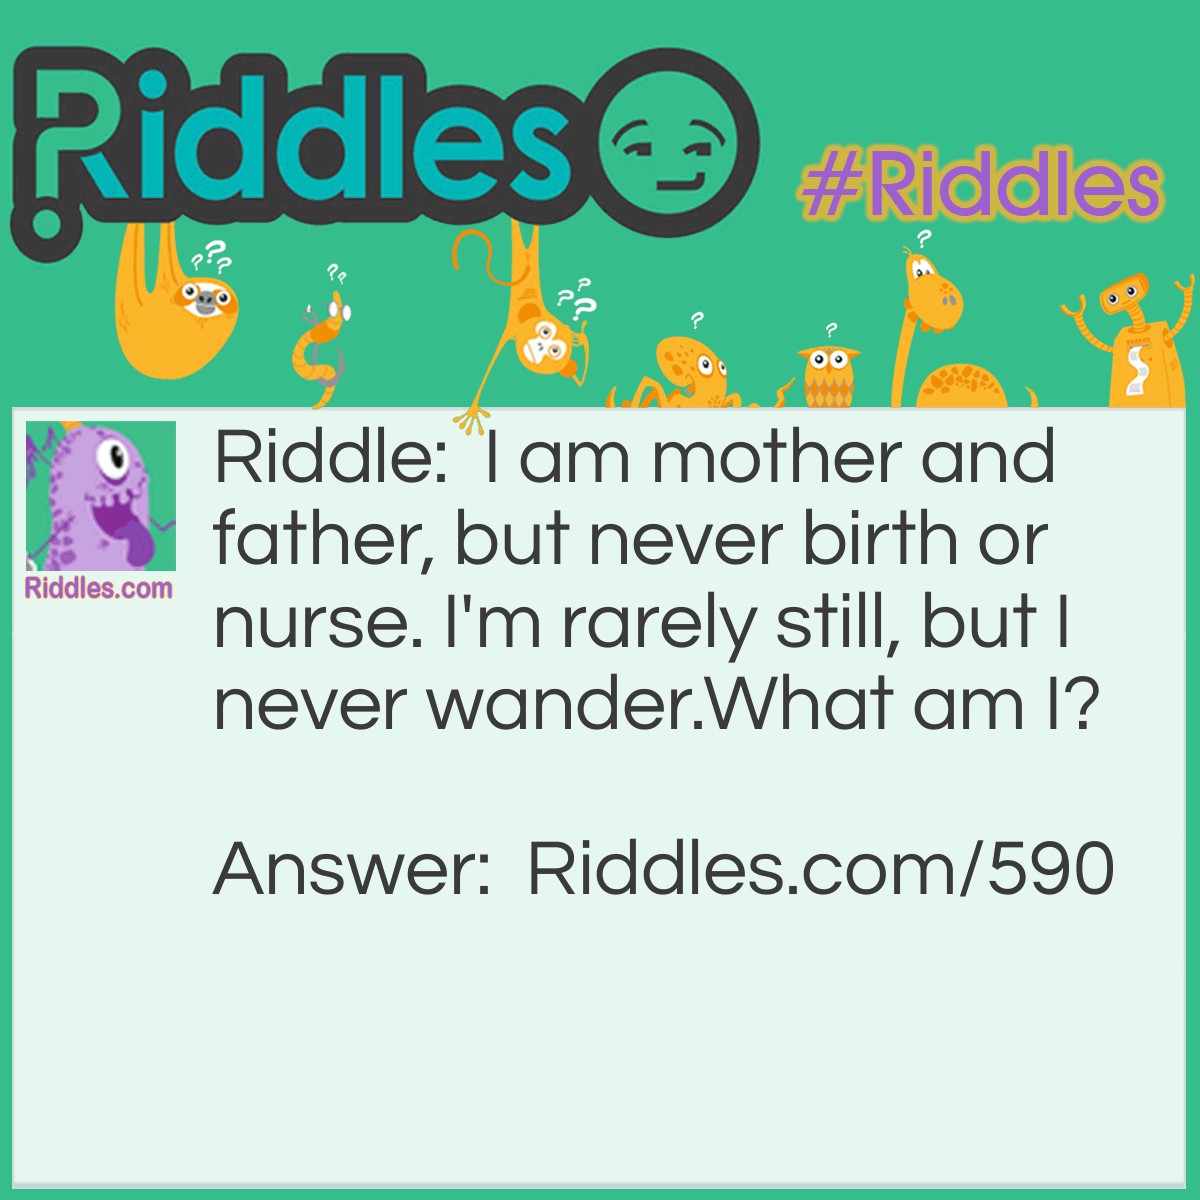 Riddle: I am mother and father, but never birth or nurse. I'm rarely still, but I never wander.
What am I? Answer: I am a tree.